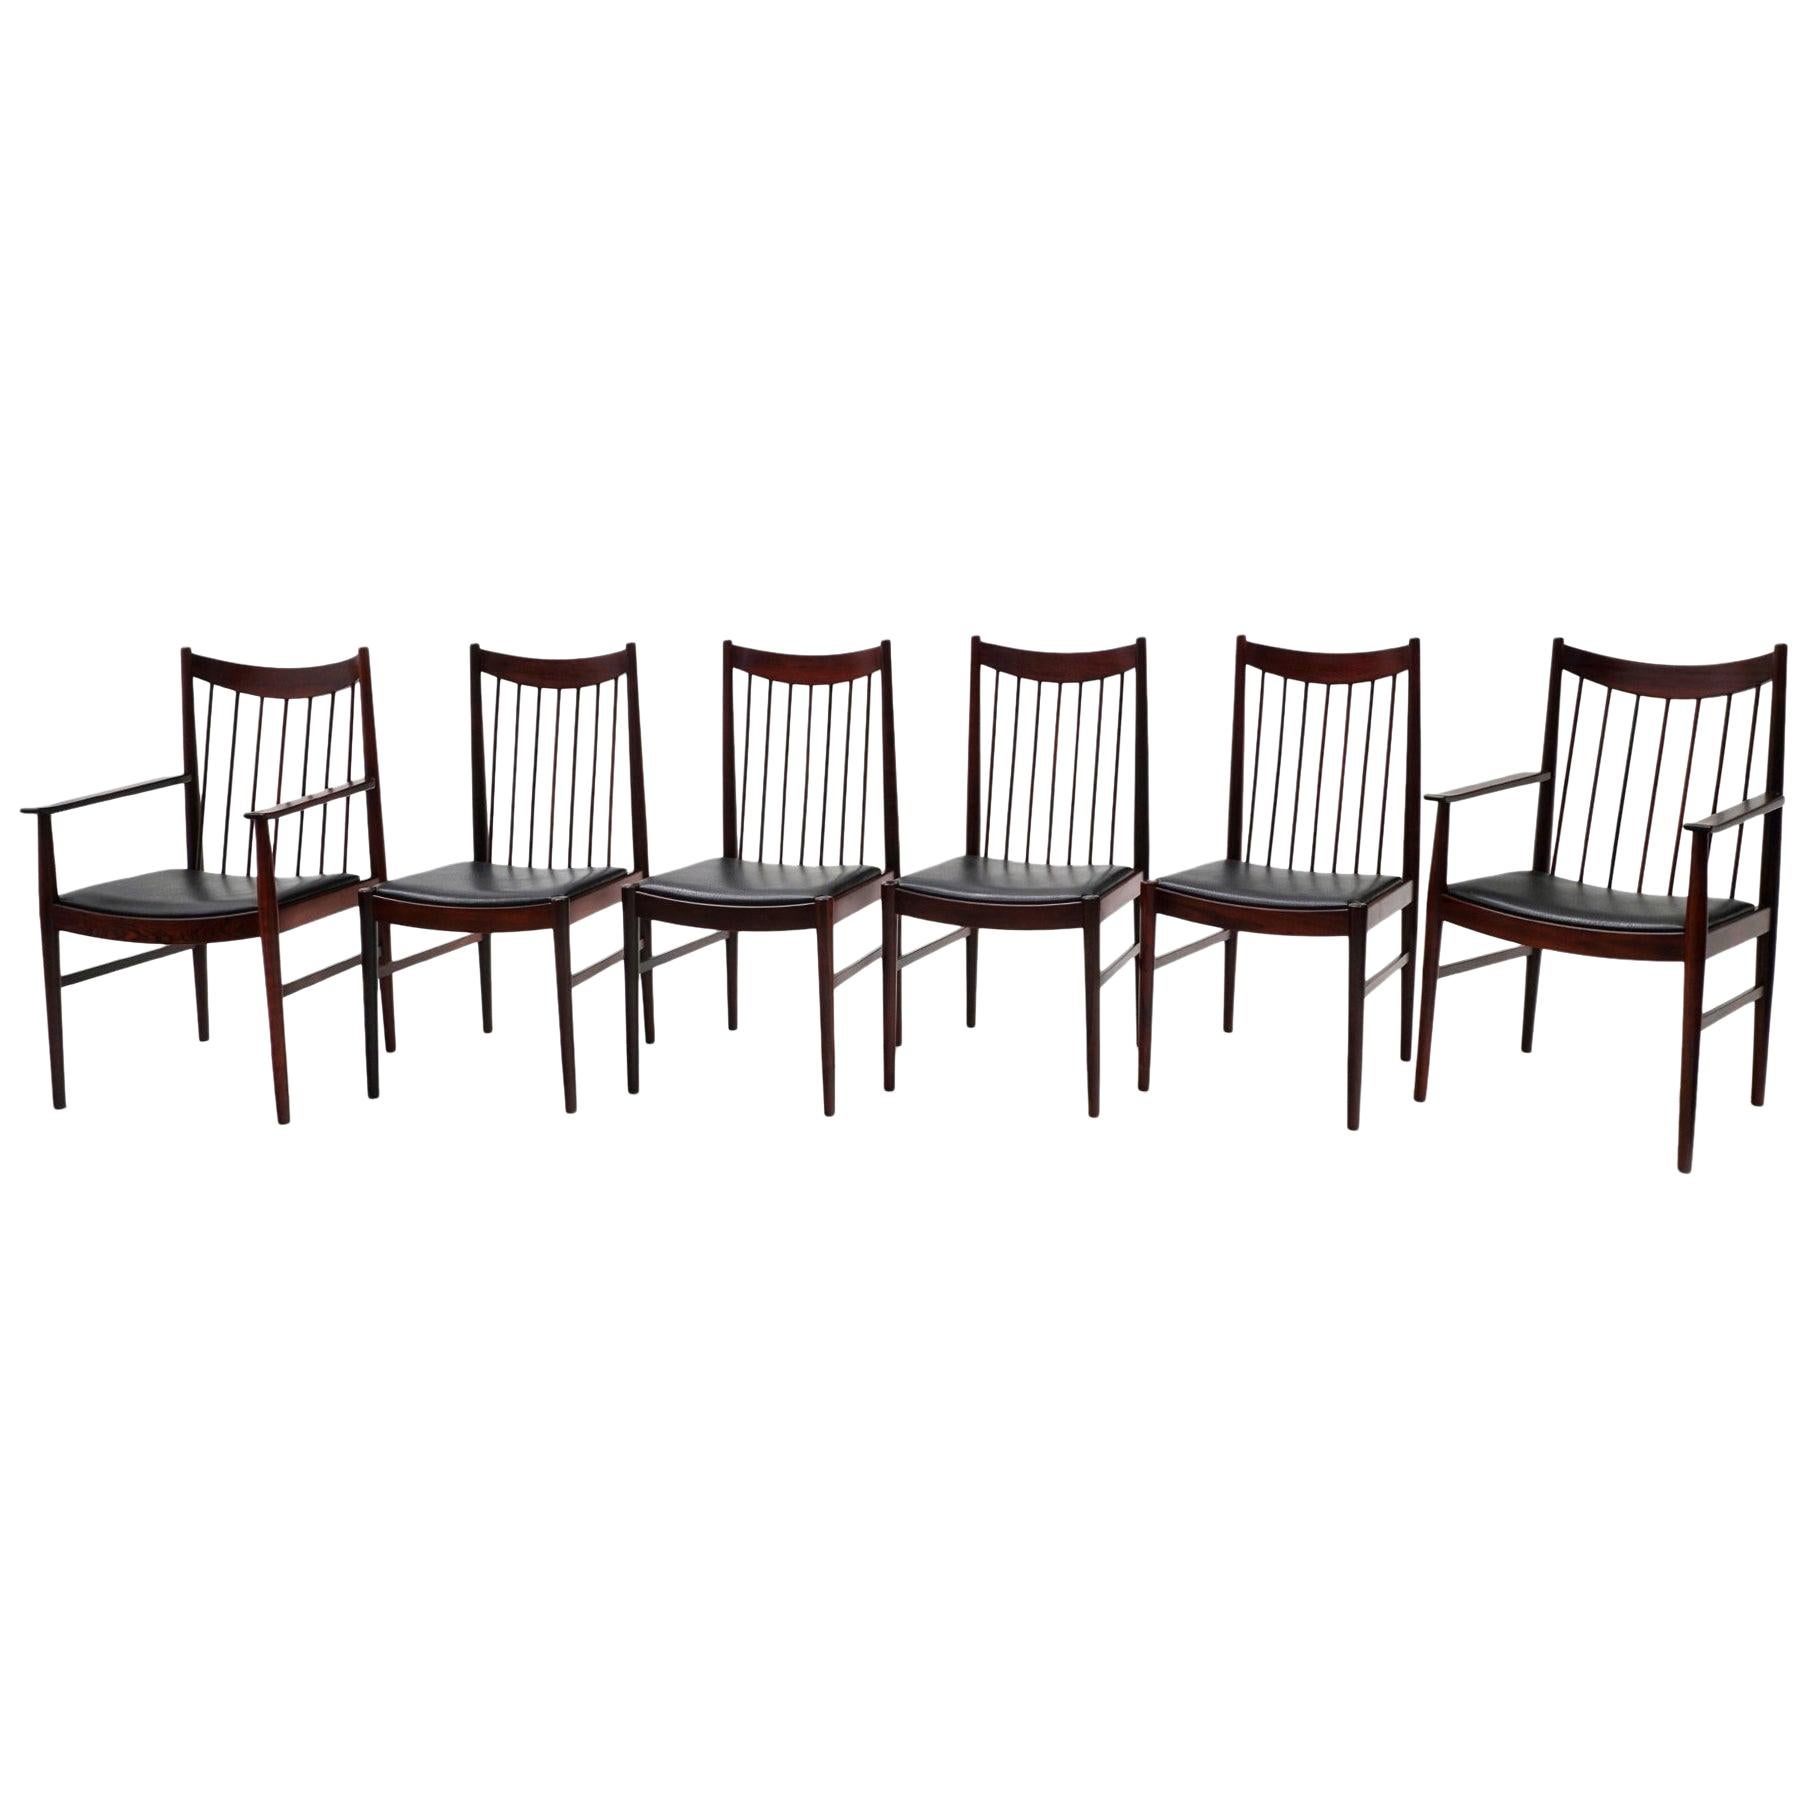 Set of 6 high back Danish modern rosewood dining chairs designed by Arne Vodder for Sibast. Expertly refinished. Original black vinyl seat covering. Two armchairs and six side chairs.

Captain chair dimensions
21.75 in. D x 21.75 in. W x 38.5